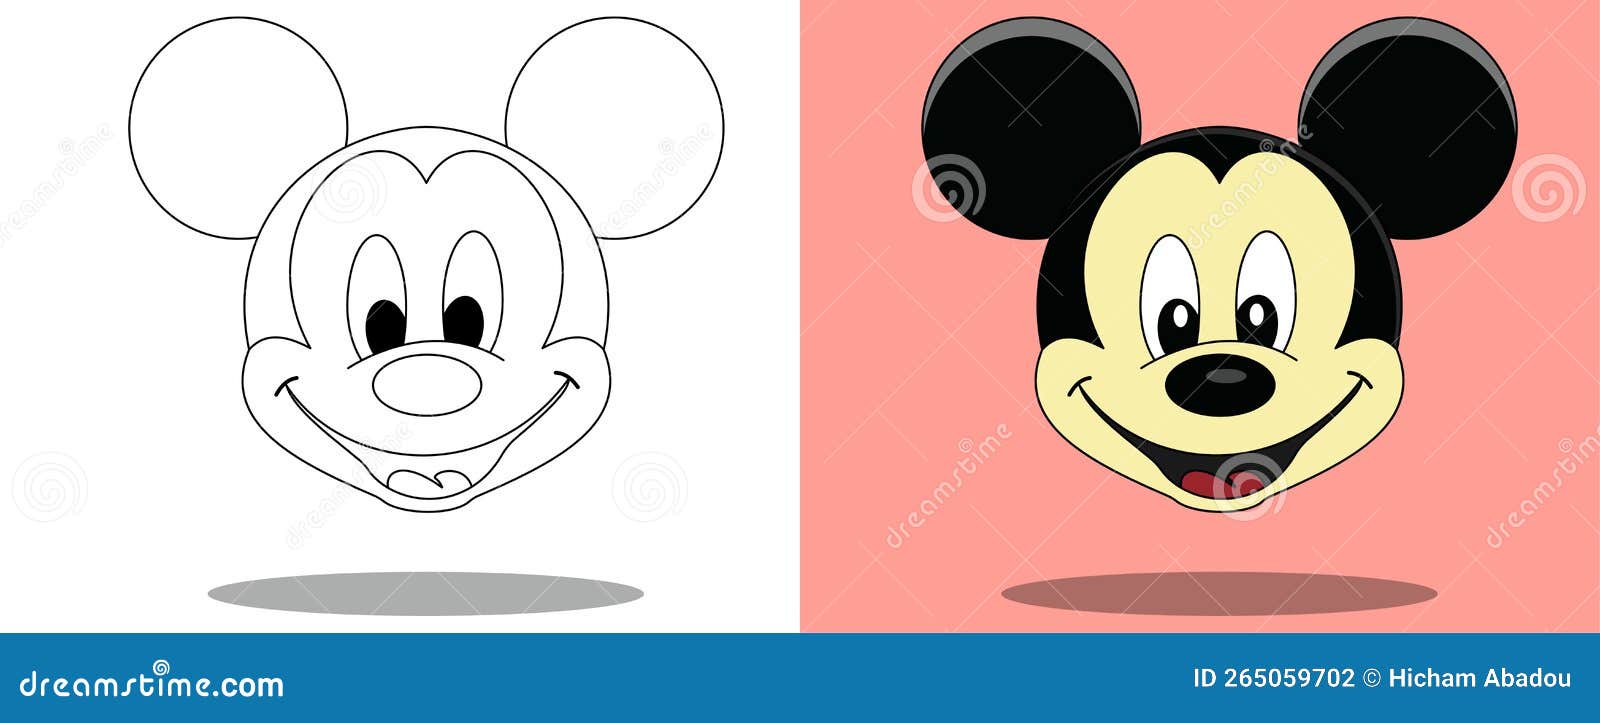 Mickey Mouse Vector Stock Illustrations – 237 Mickey Mouse Vector Stock  Illustrations, Vectors & Clipart - Dreamstime